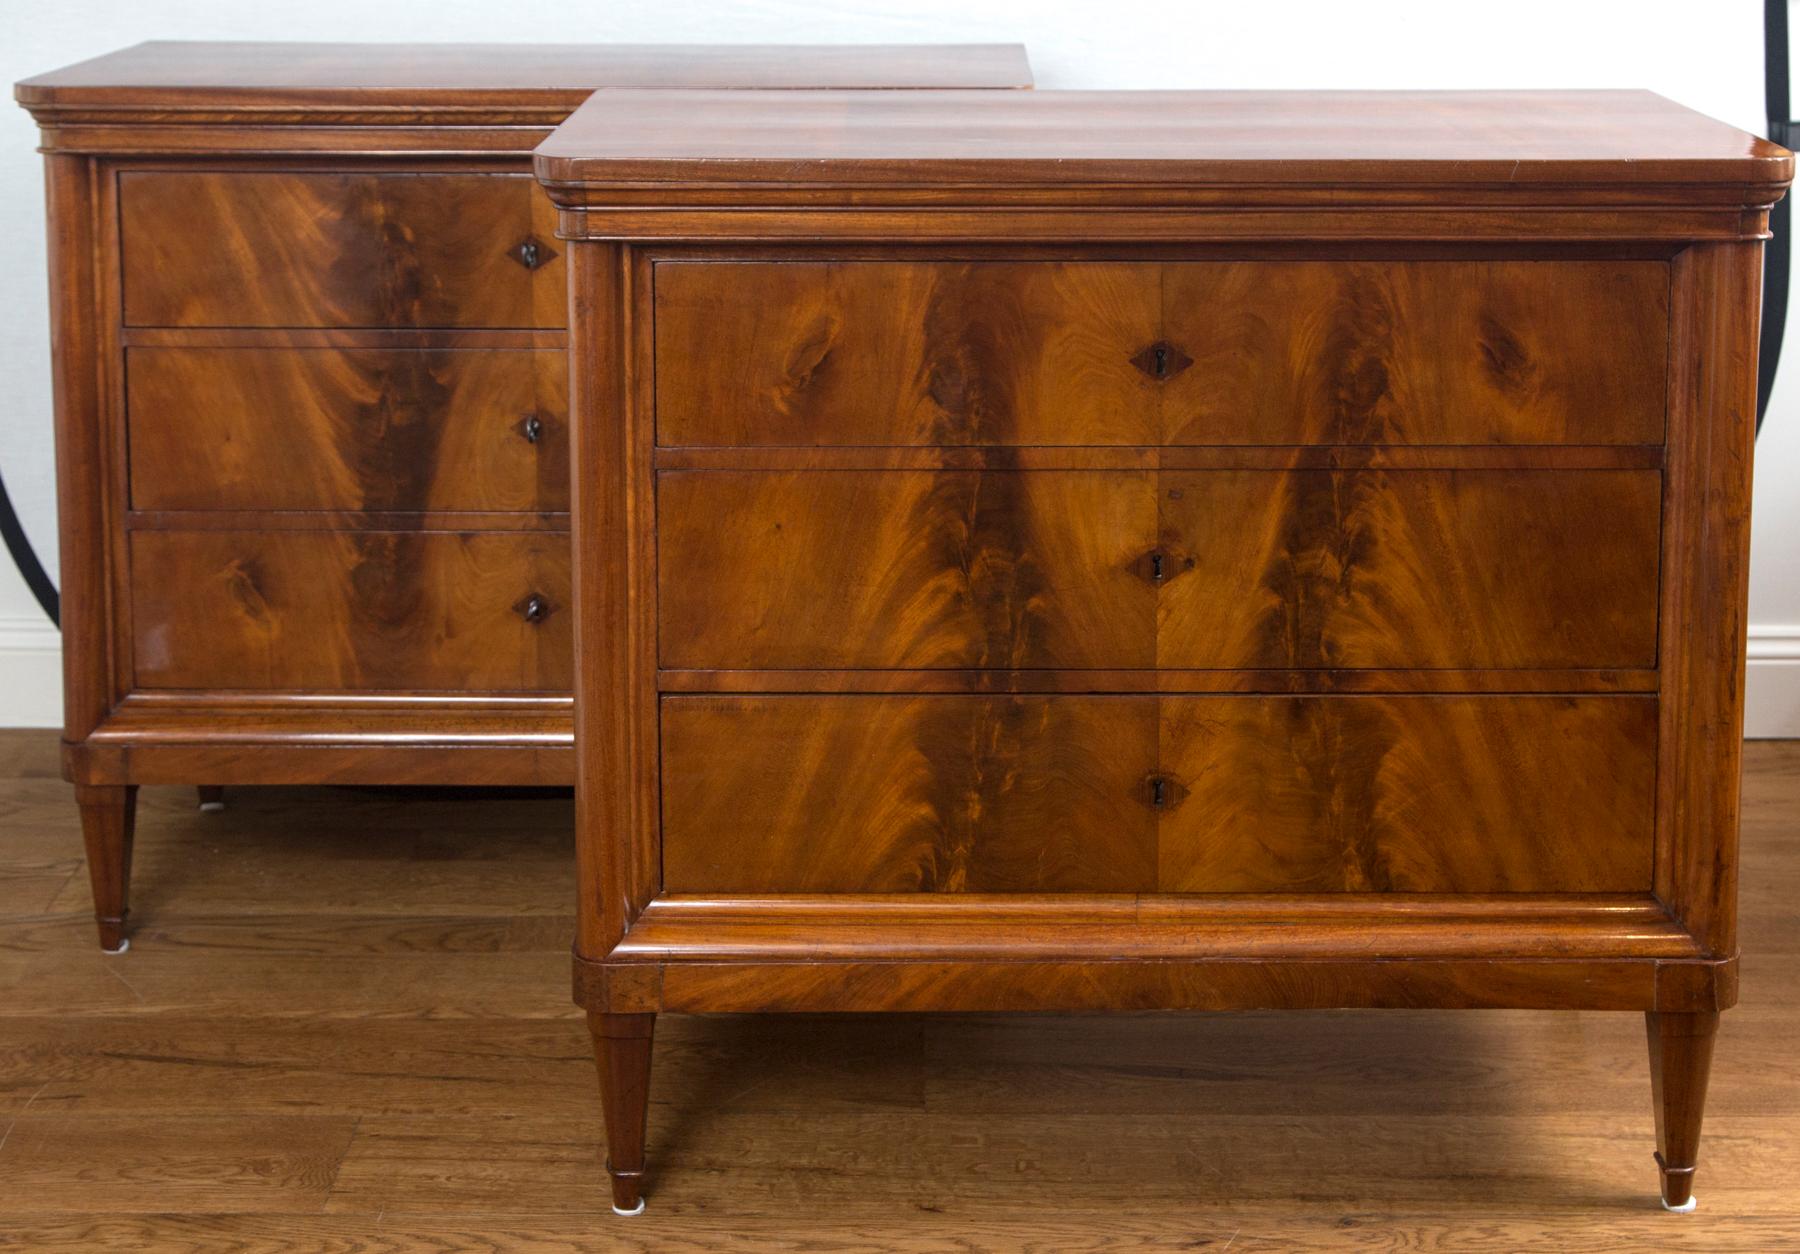 A very fine pair continental chests each with a beveled and rounded front molding showcasing three drawers with diamond shaped inlaid keyholes, finishing on straight tapered legs, all original, secondary wood is oak, note veneer interior drawers